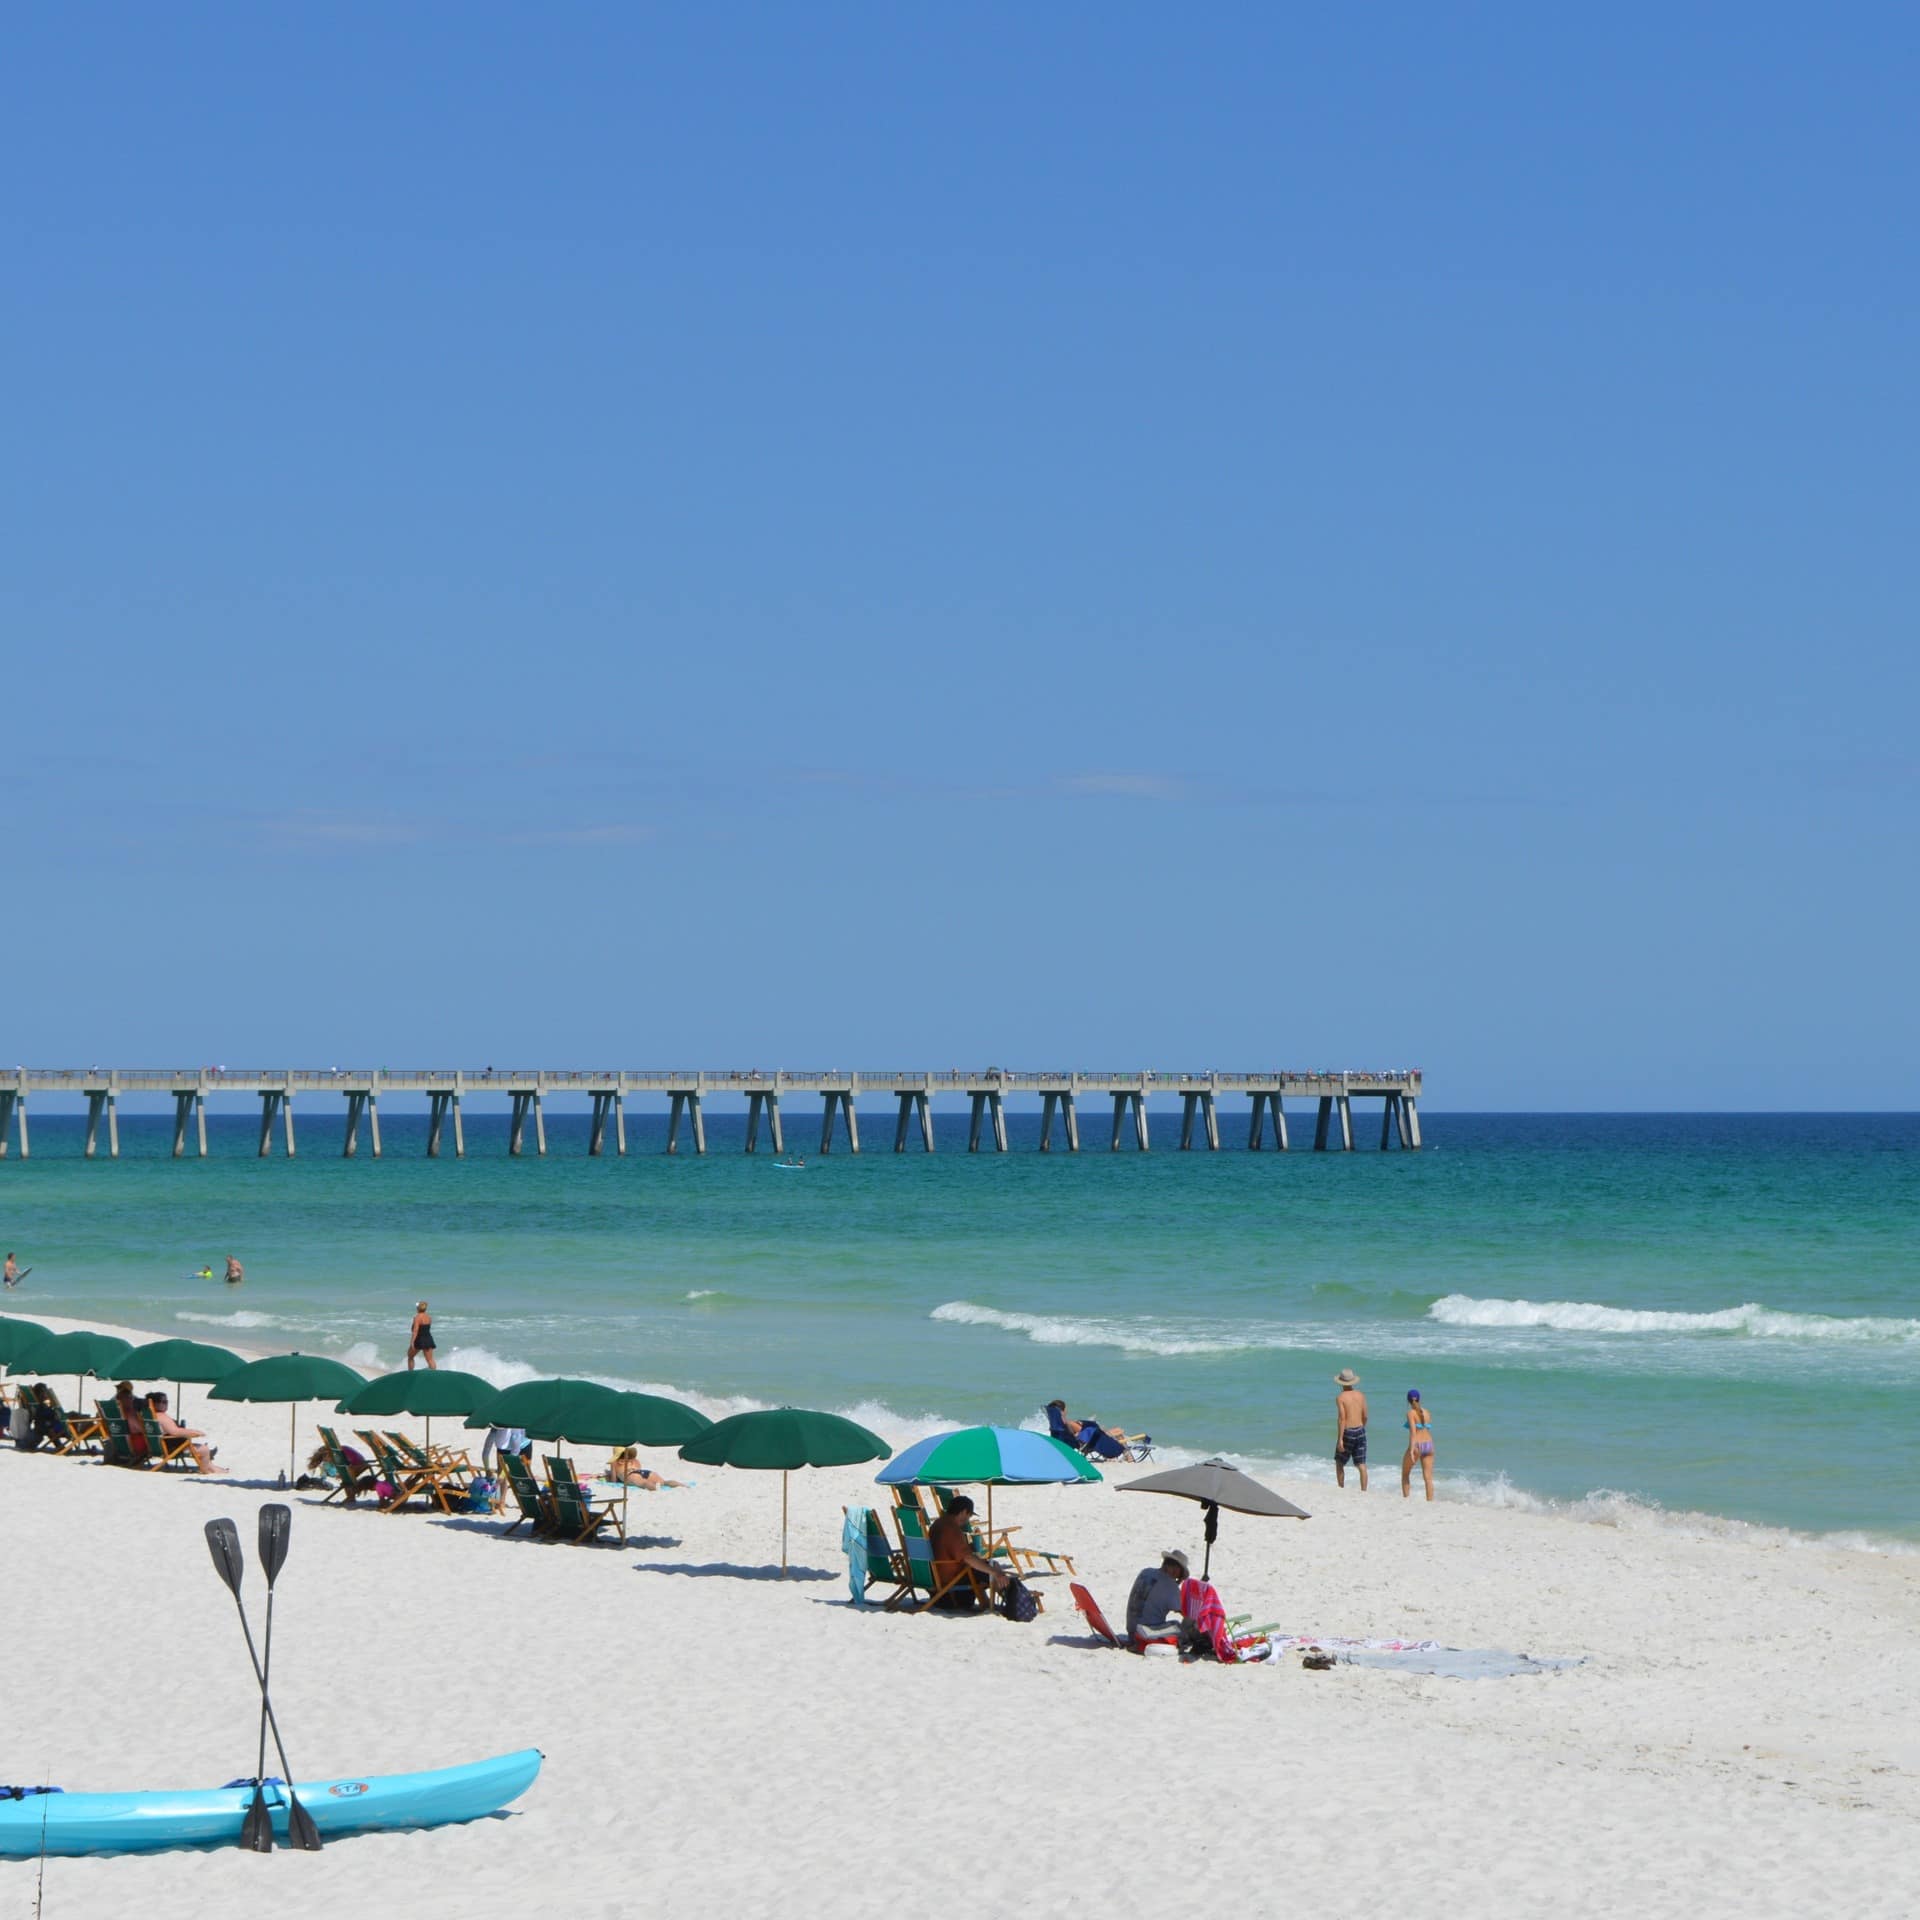 People walk up Fort Walton Beach's sands by kayaks, sun umbrellas, and a long fishing pier